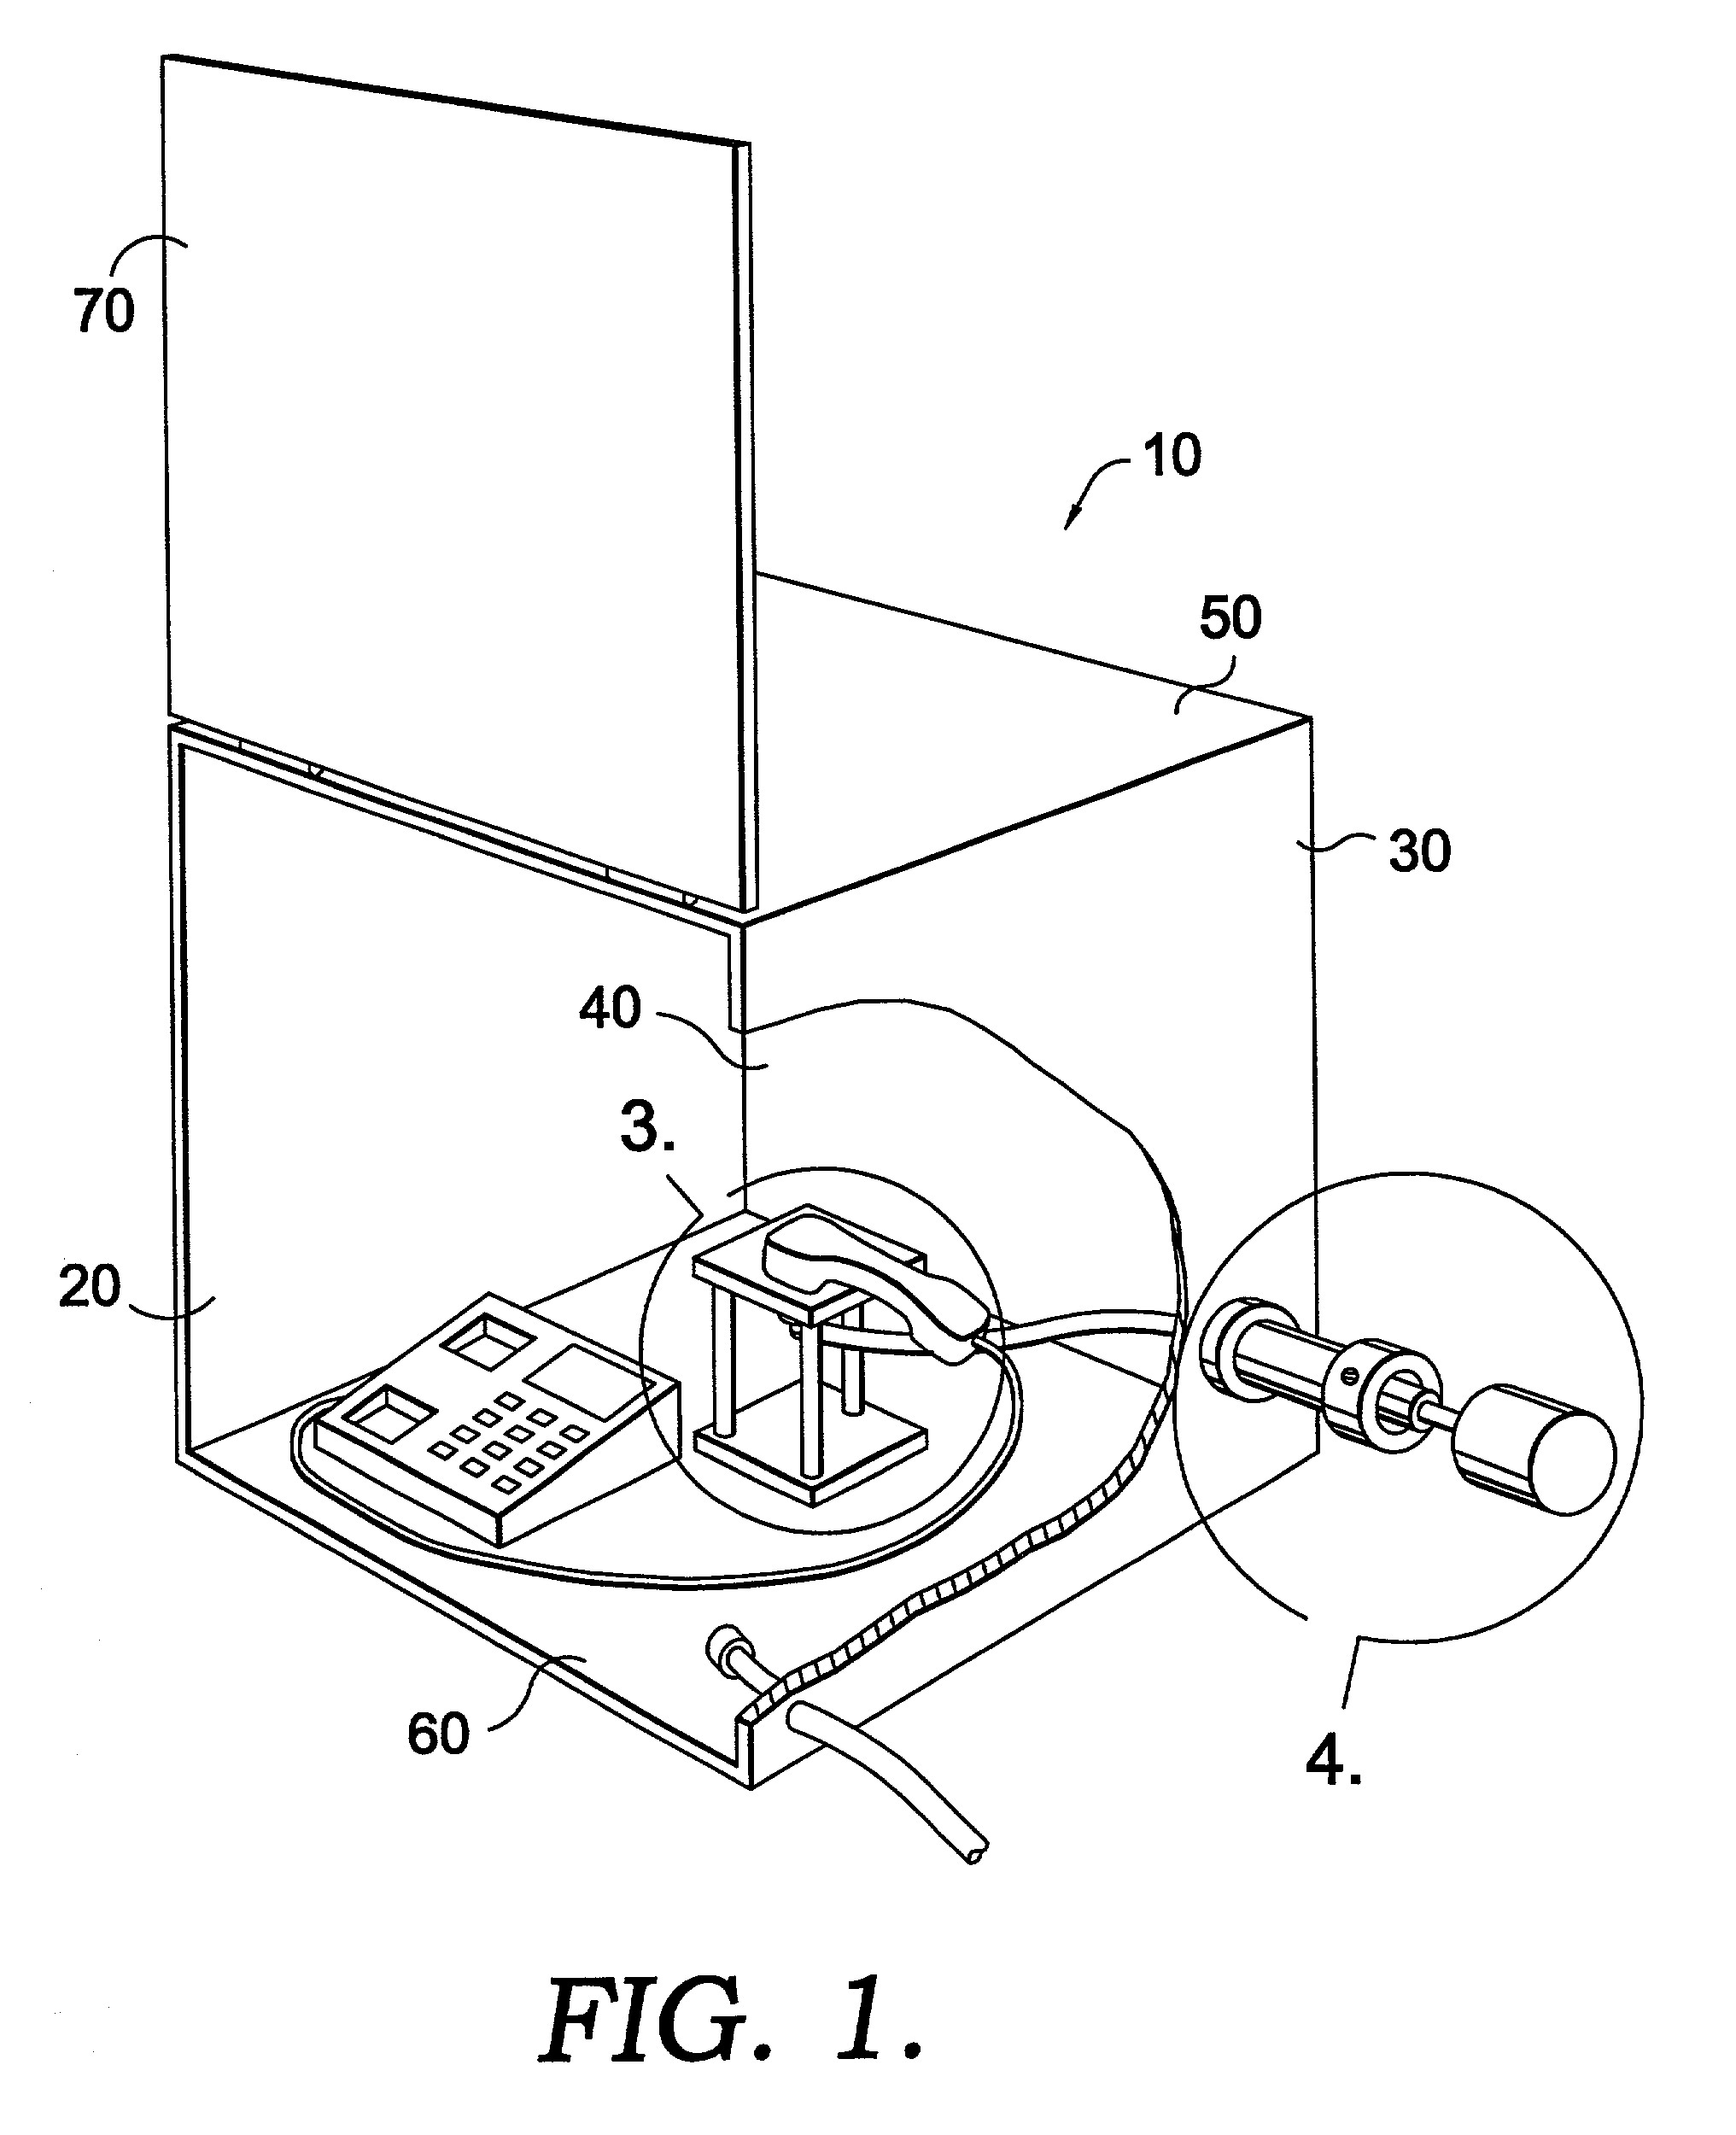 Acoustic signal transfer device